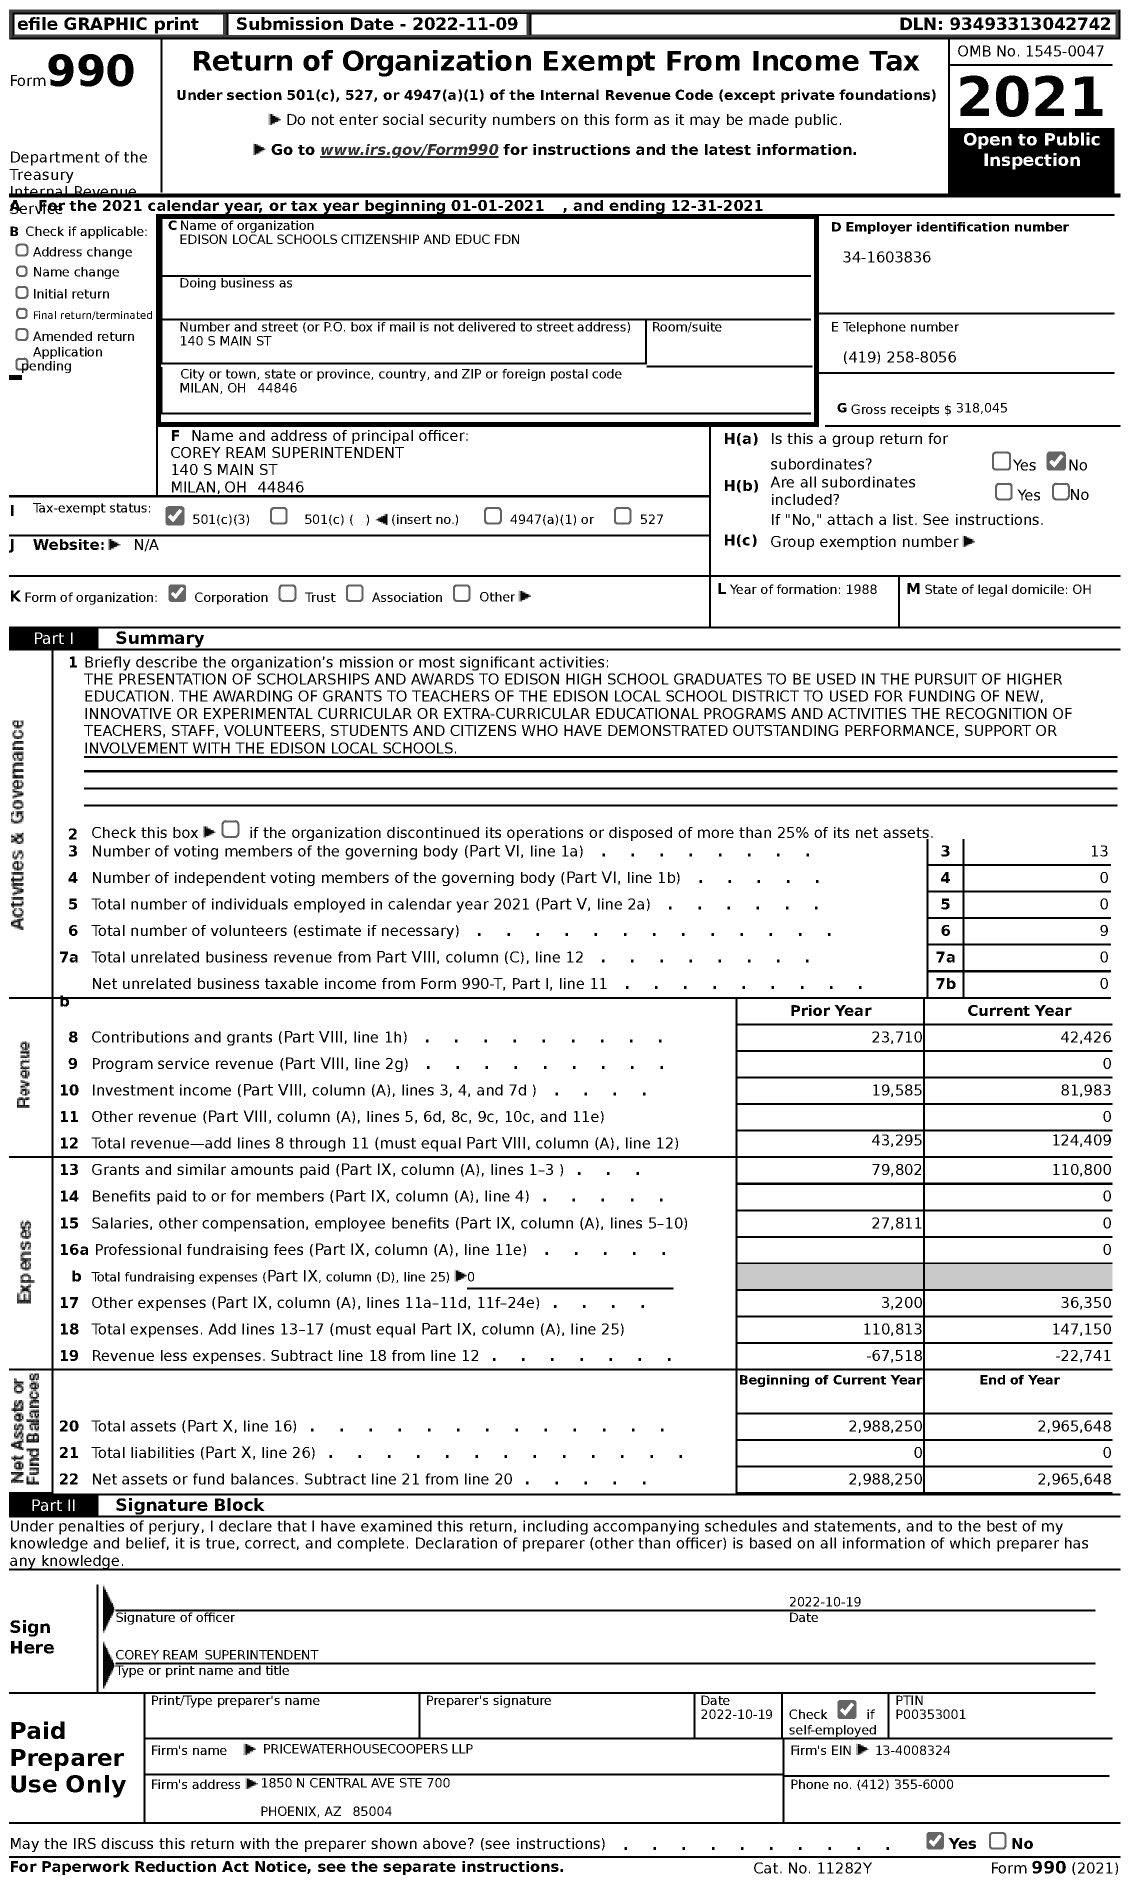 Image of first page of 2021 Form 990 for Edison Local Schools Citizenship and Educ Foundation